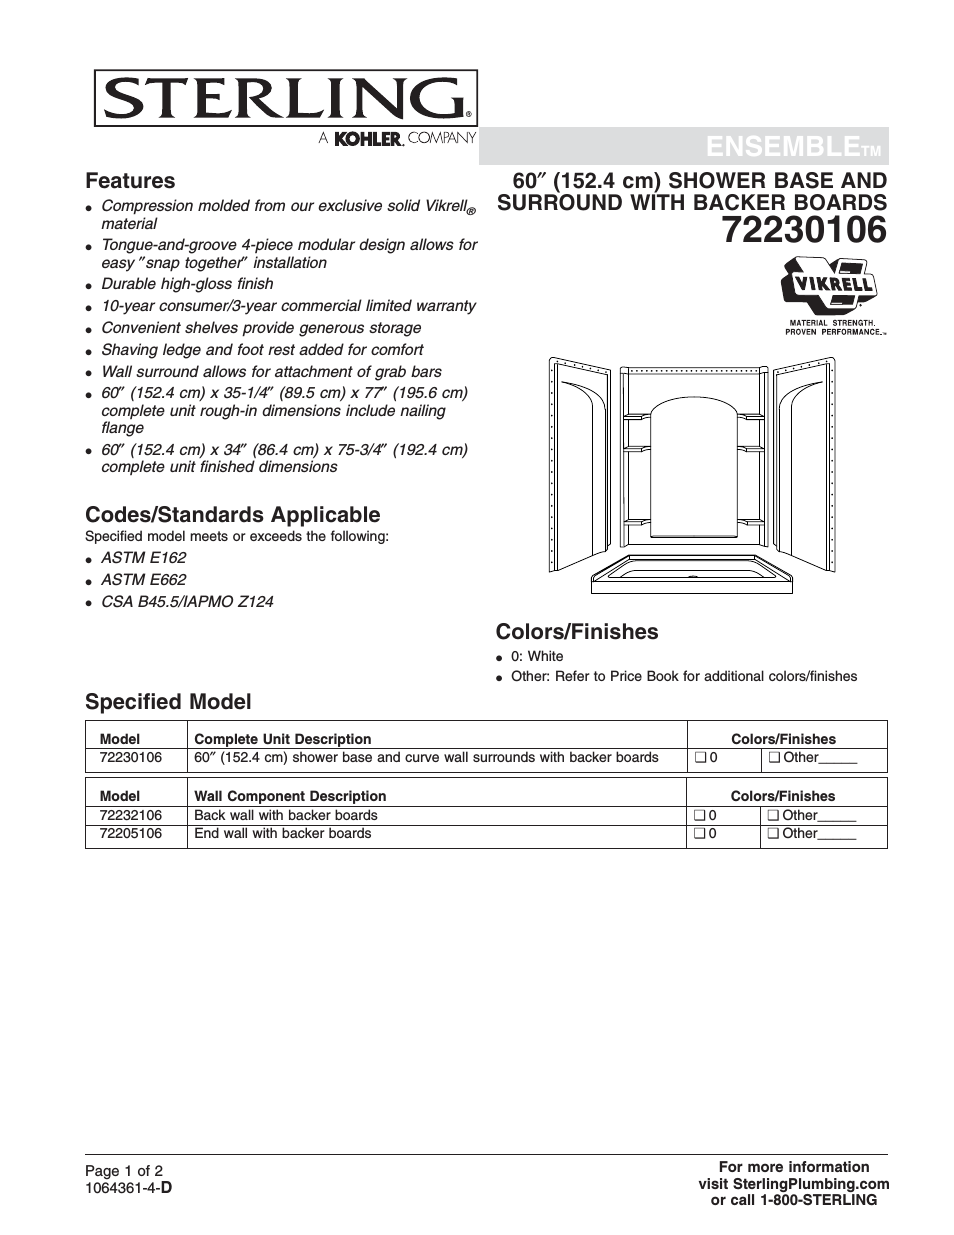 Shower Receptor and Wall Surround with Backer Boards 72230106